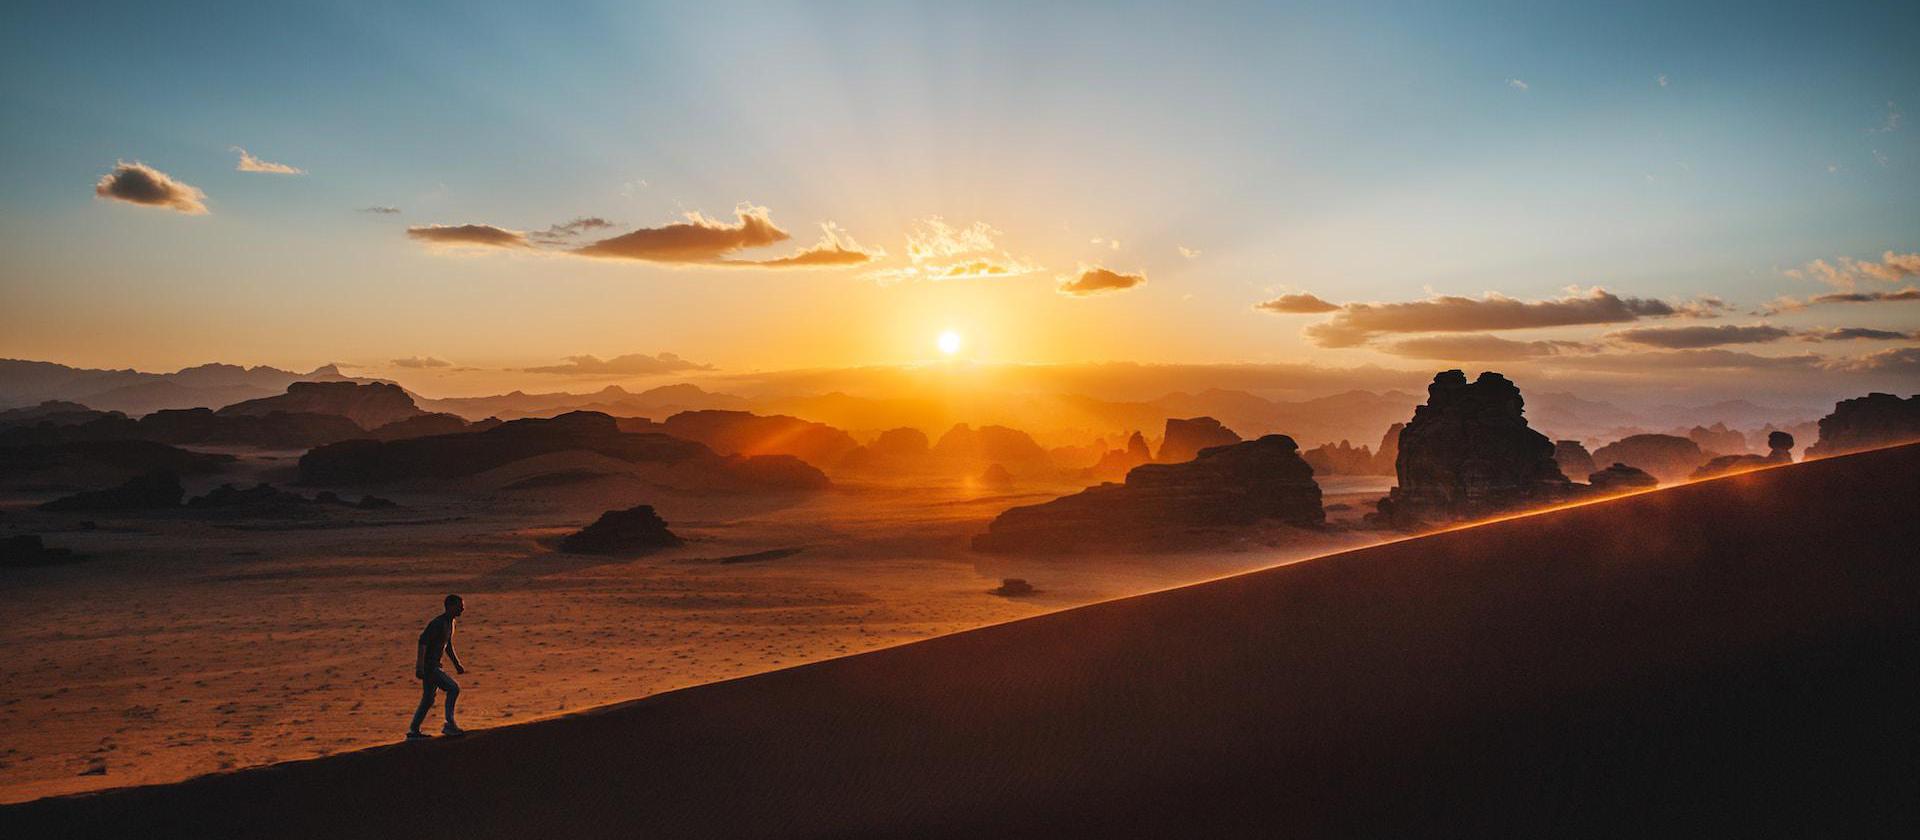 Sunset in the Hisma Desert. NEOM, Saudi Arabia | The NEOM Nature Reserve region is being designed to deliver protection and restoration of biodiversity across 95% of NEOM